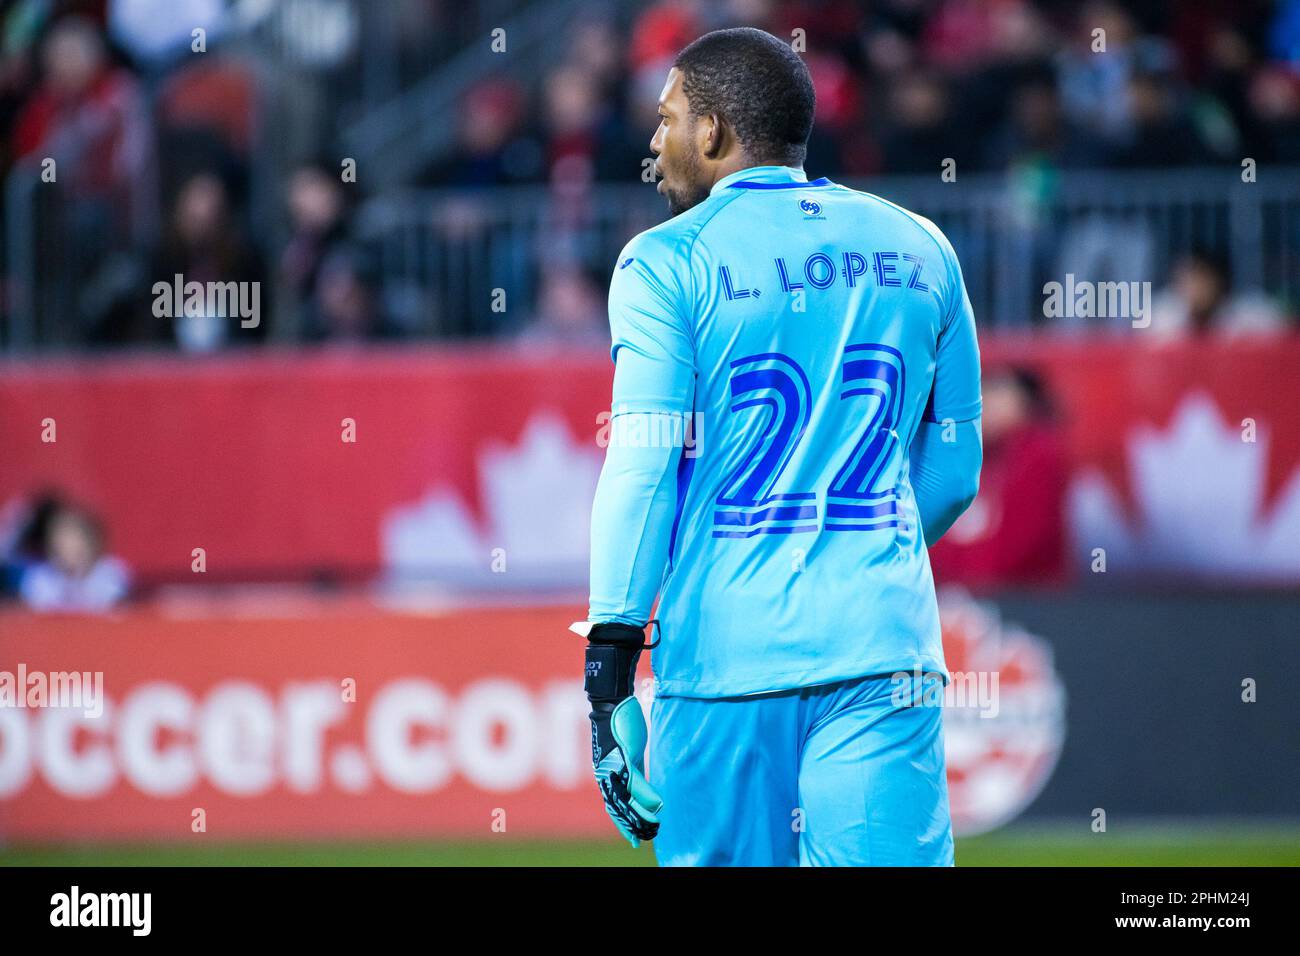 Toronto, Canada. 28th Mar, 2023. Luis Lopez #22 of Honduras team in action during the CONCACAF Nations League qualifier game between Canada and Honduras at BMO field in Toronto. The game ended 4-1 for Canada sending it to the semifinals. (Photo by Angel Marchini/SOPA Images/Sipa USA) Credit: Sipa USA/Alamy Live News Stock Photo